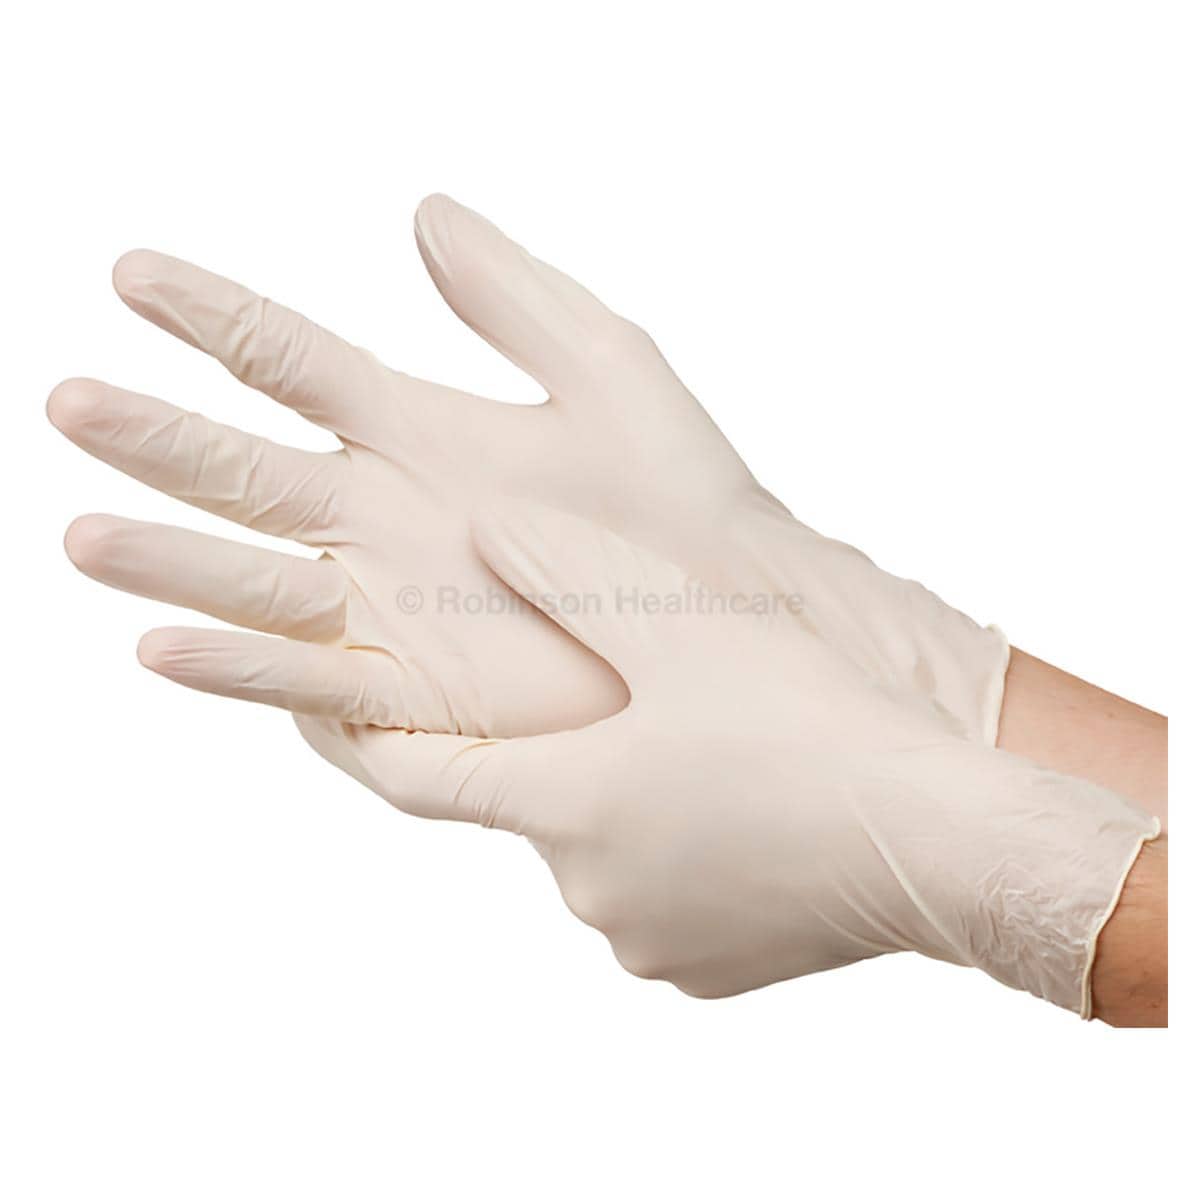 synthetic gloves